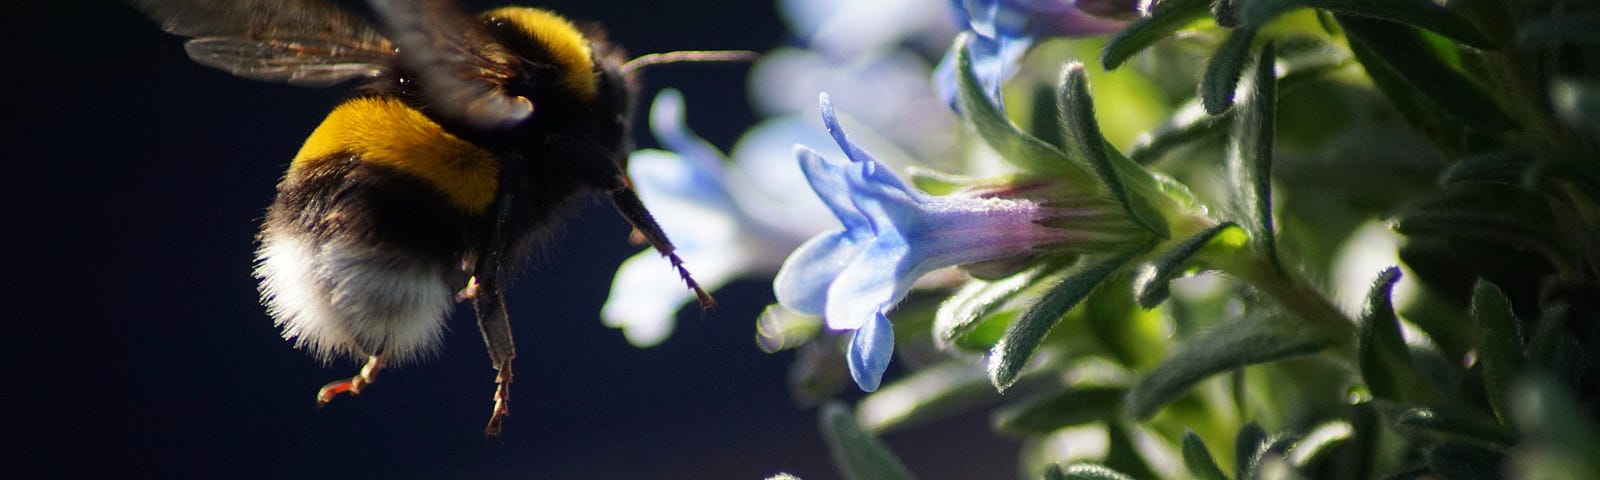 a bumblebee pollinating a flower